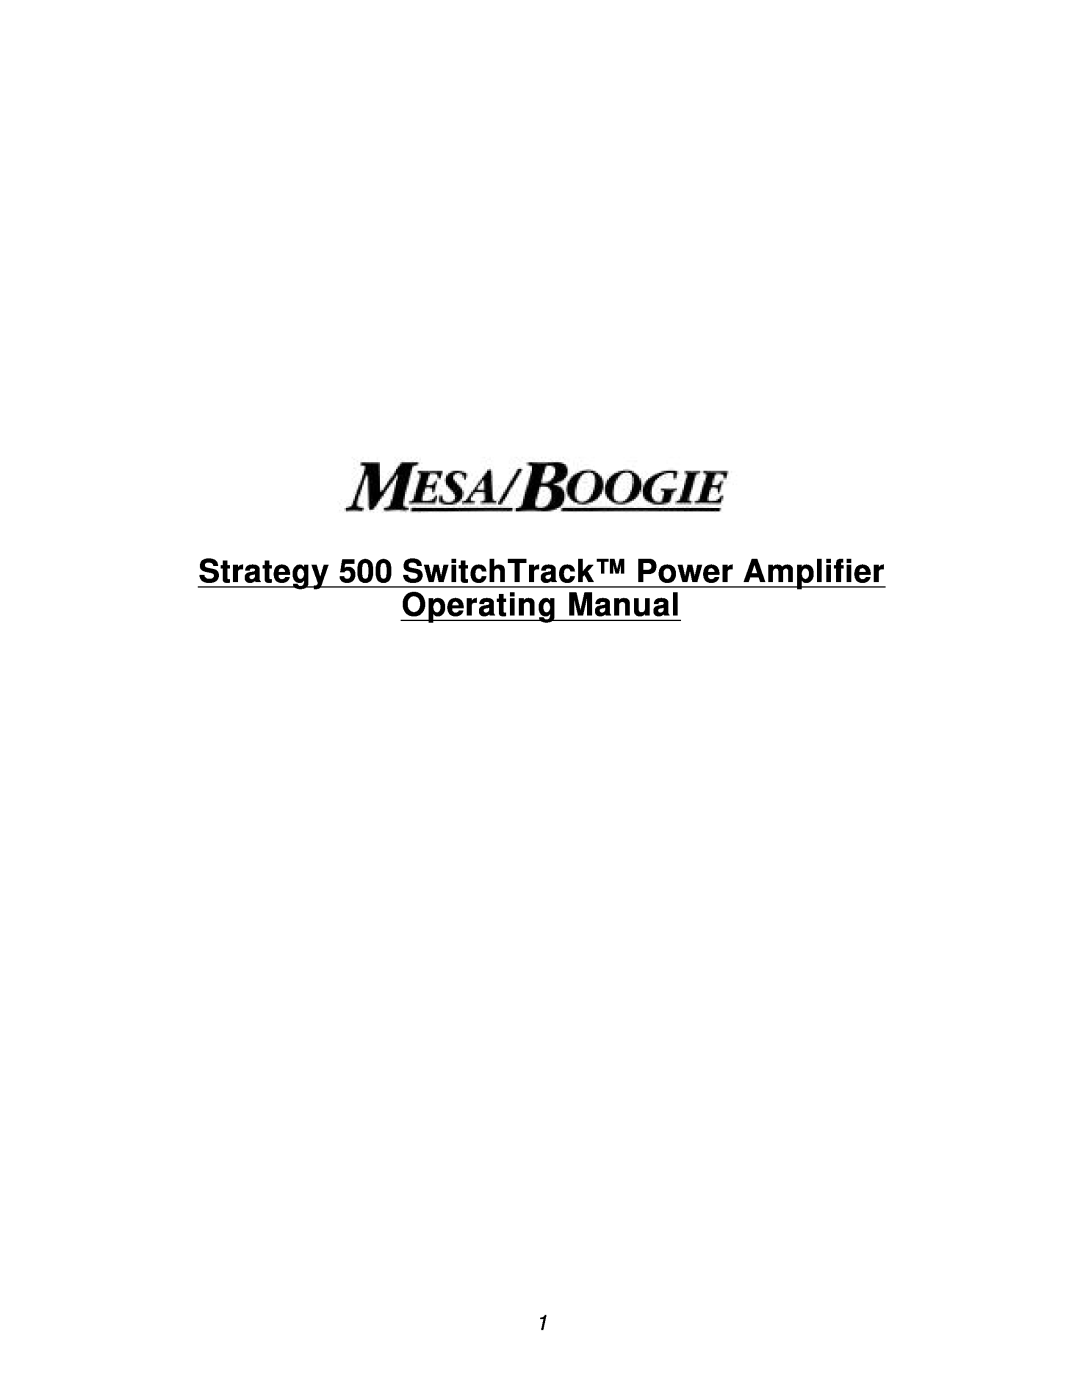 Mesa/Boogie manual Strategy 500 SwitchTrack Power Amplifier, Operating Manual 